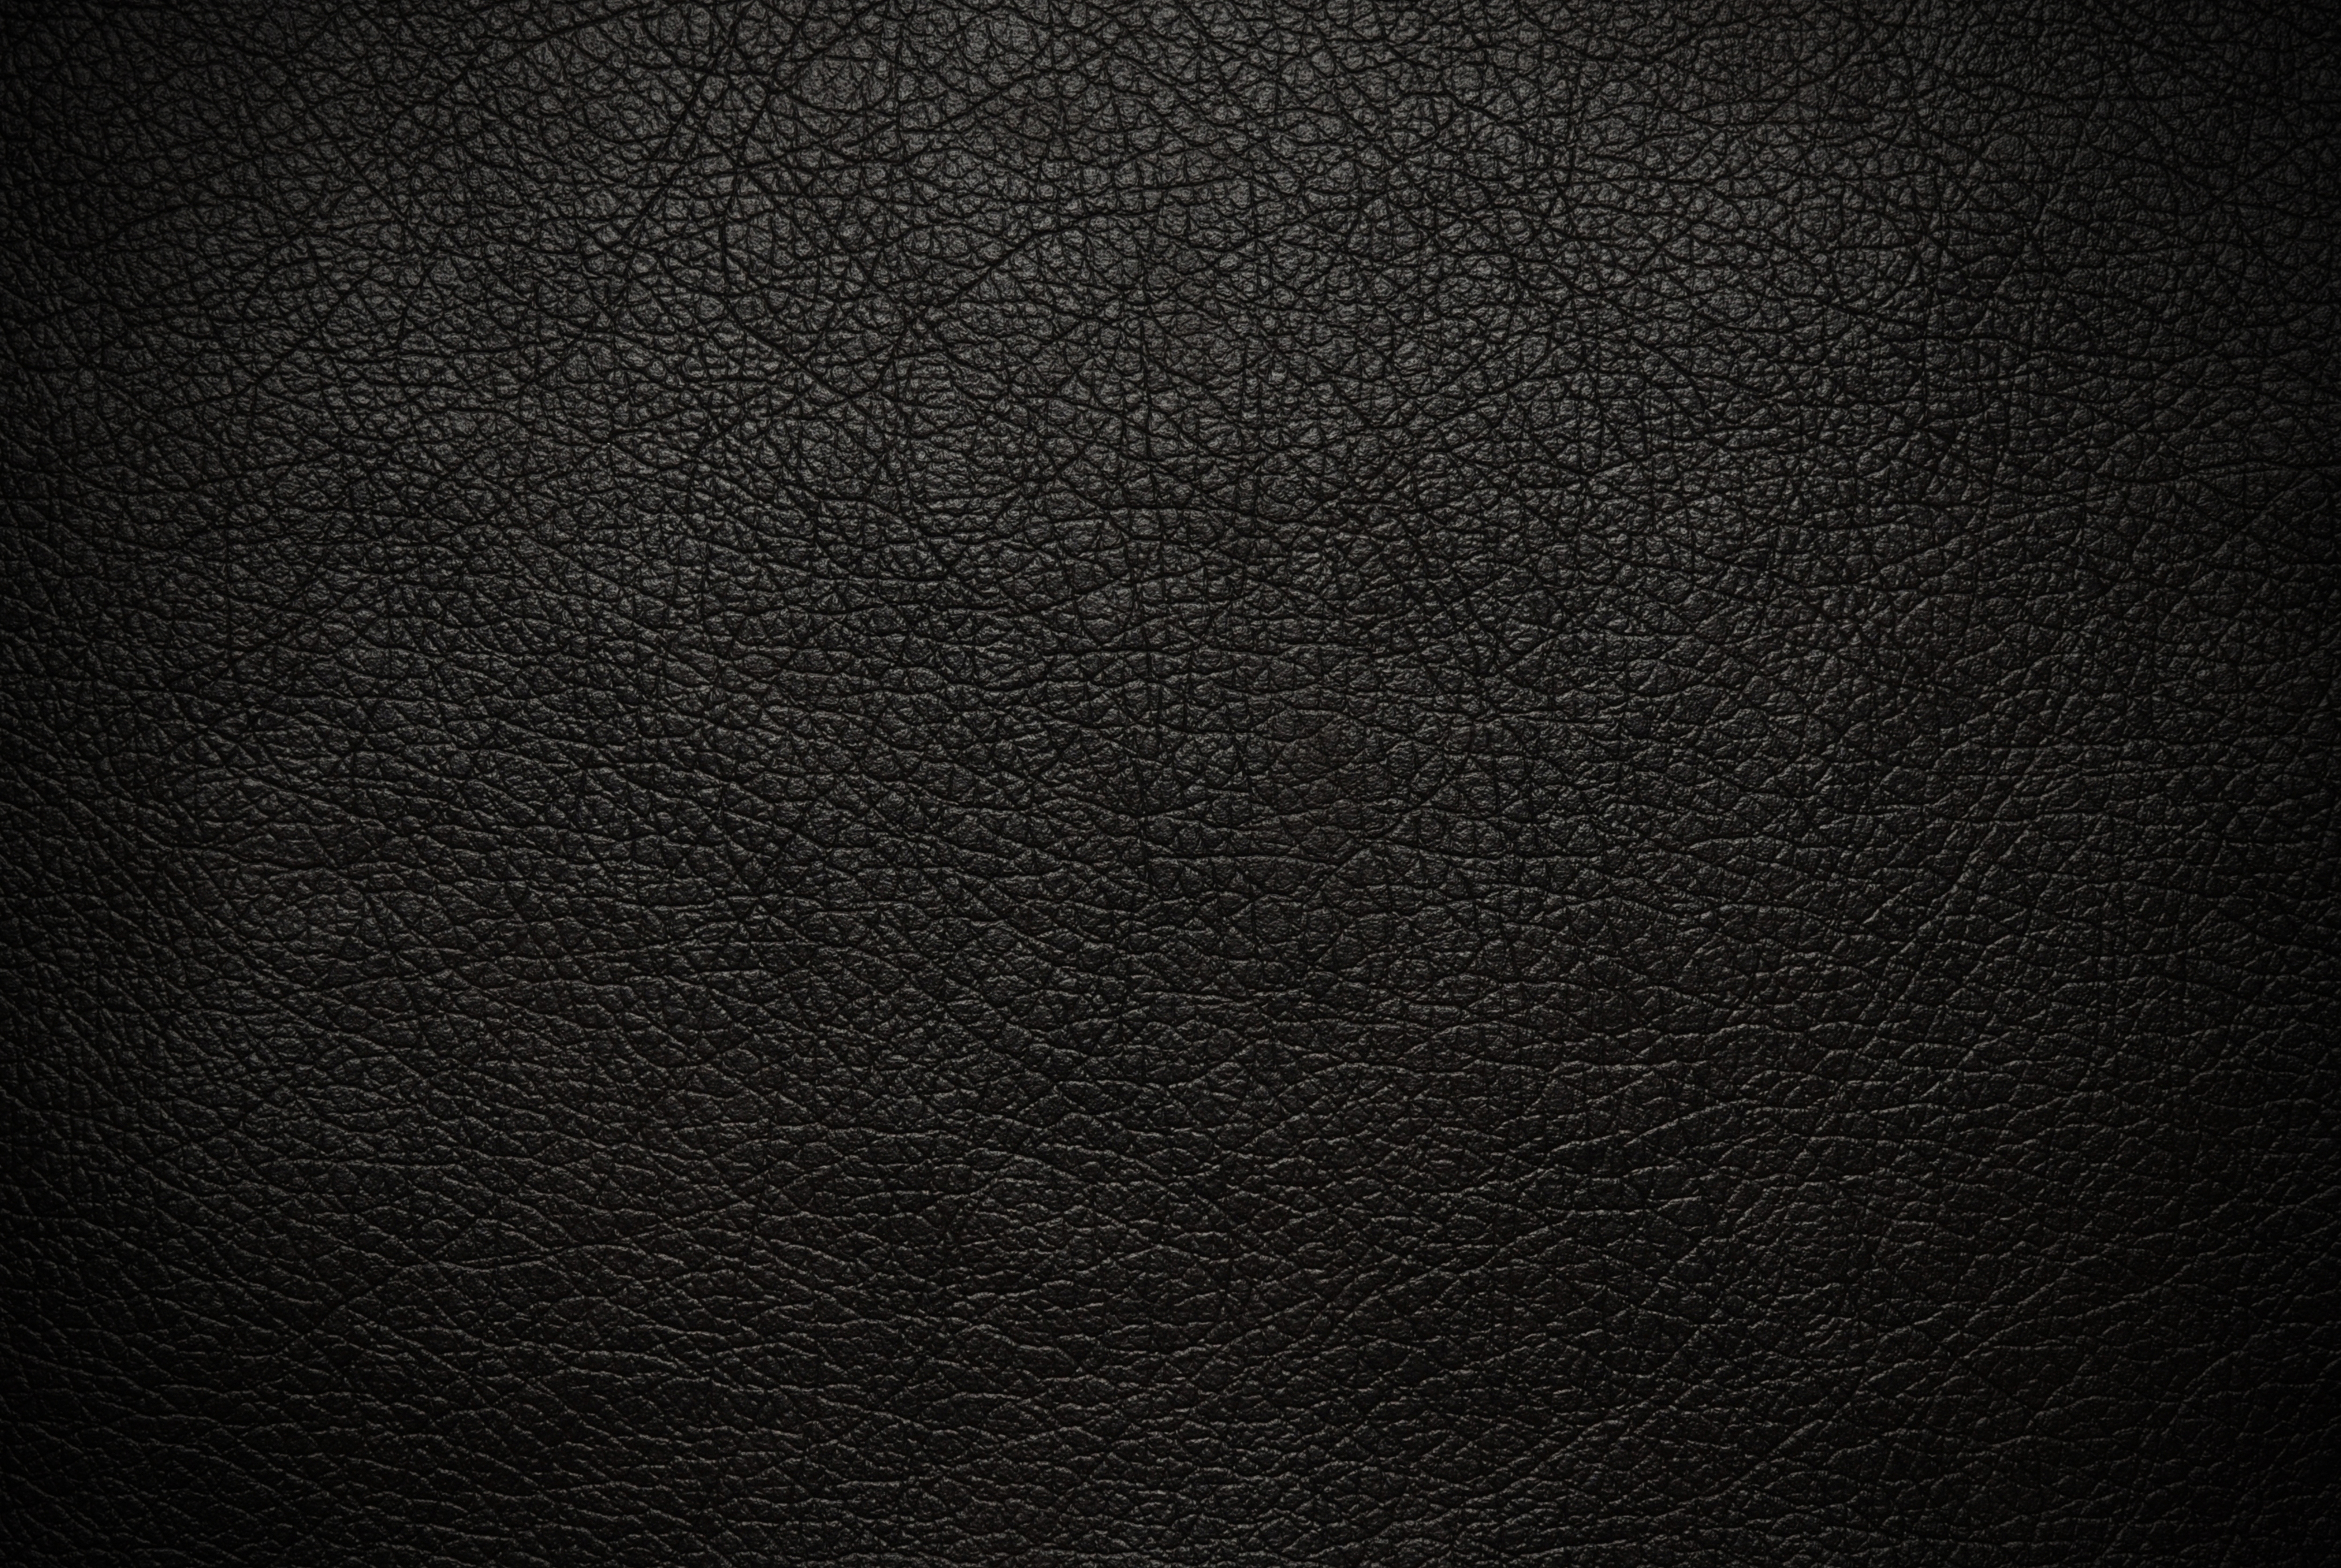 Leather black cracked background texture